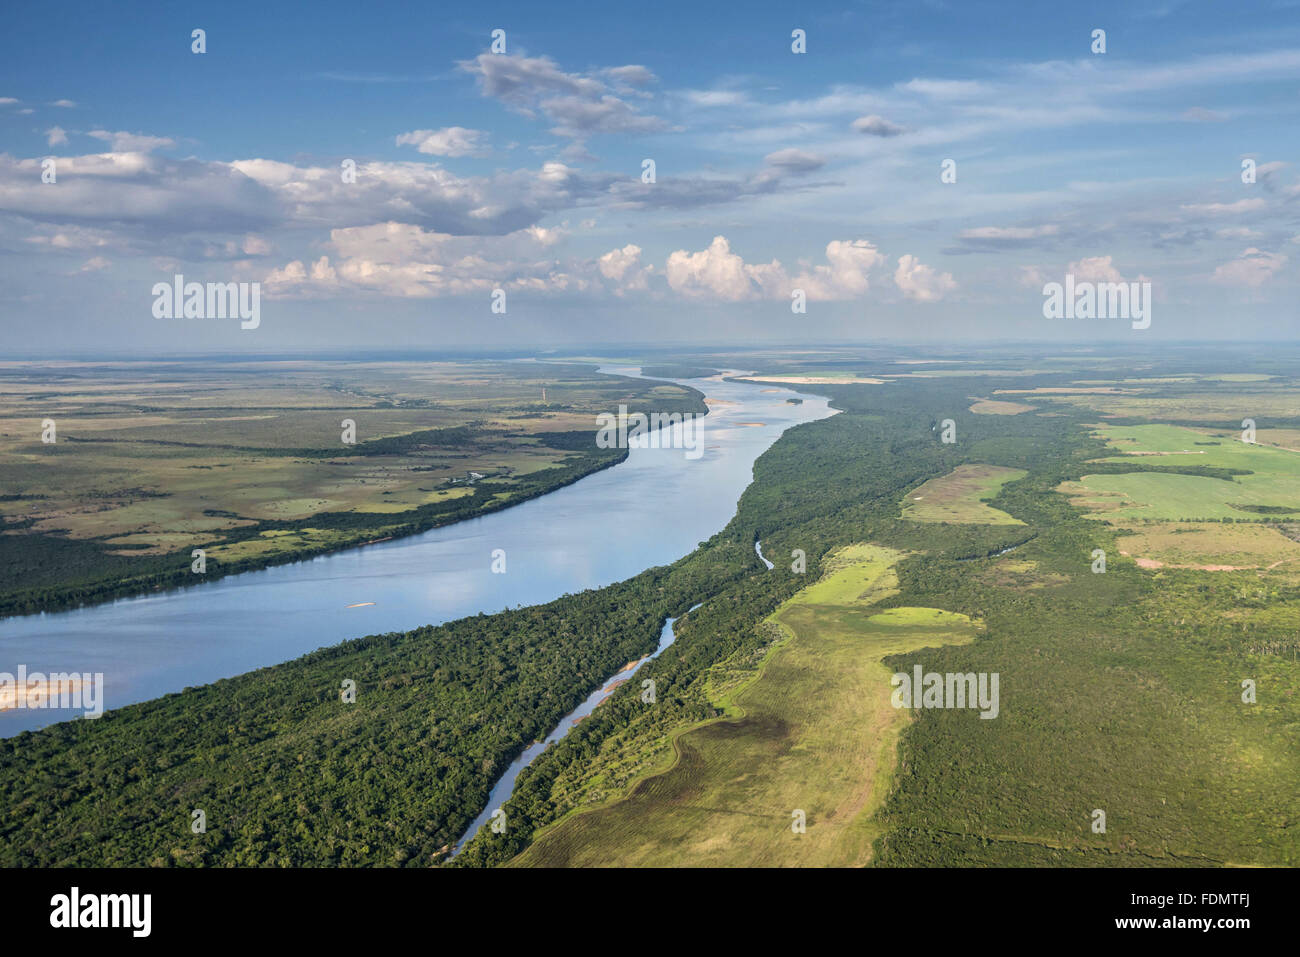 Aerial view of the White River and Amazon forest Stock Photo